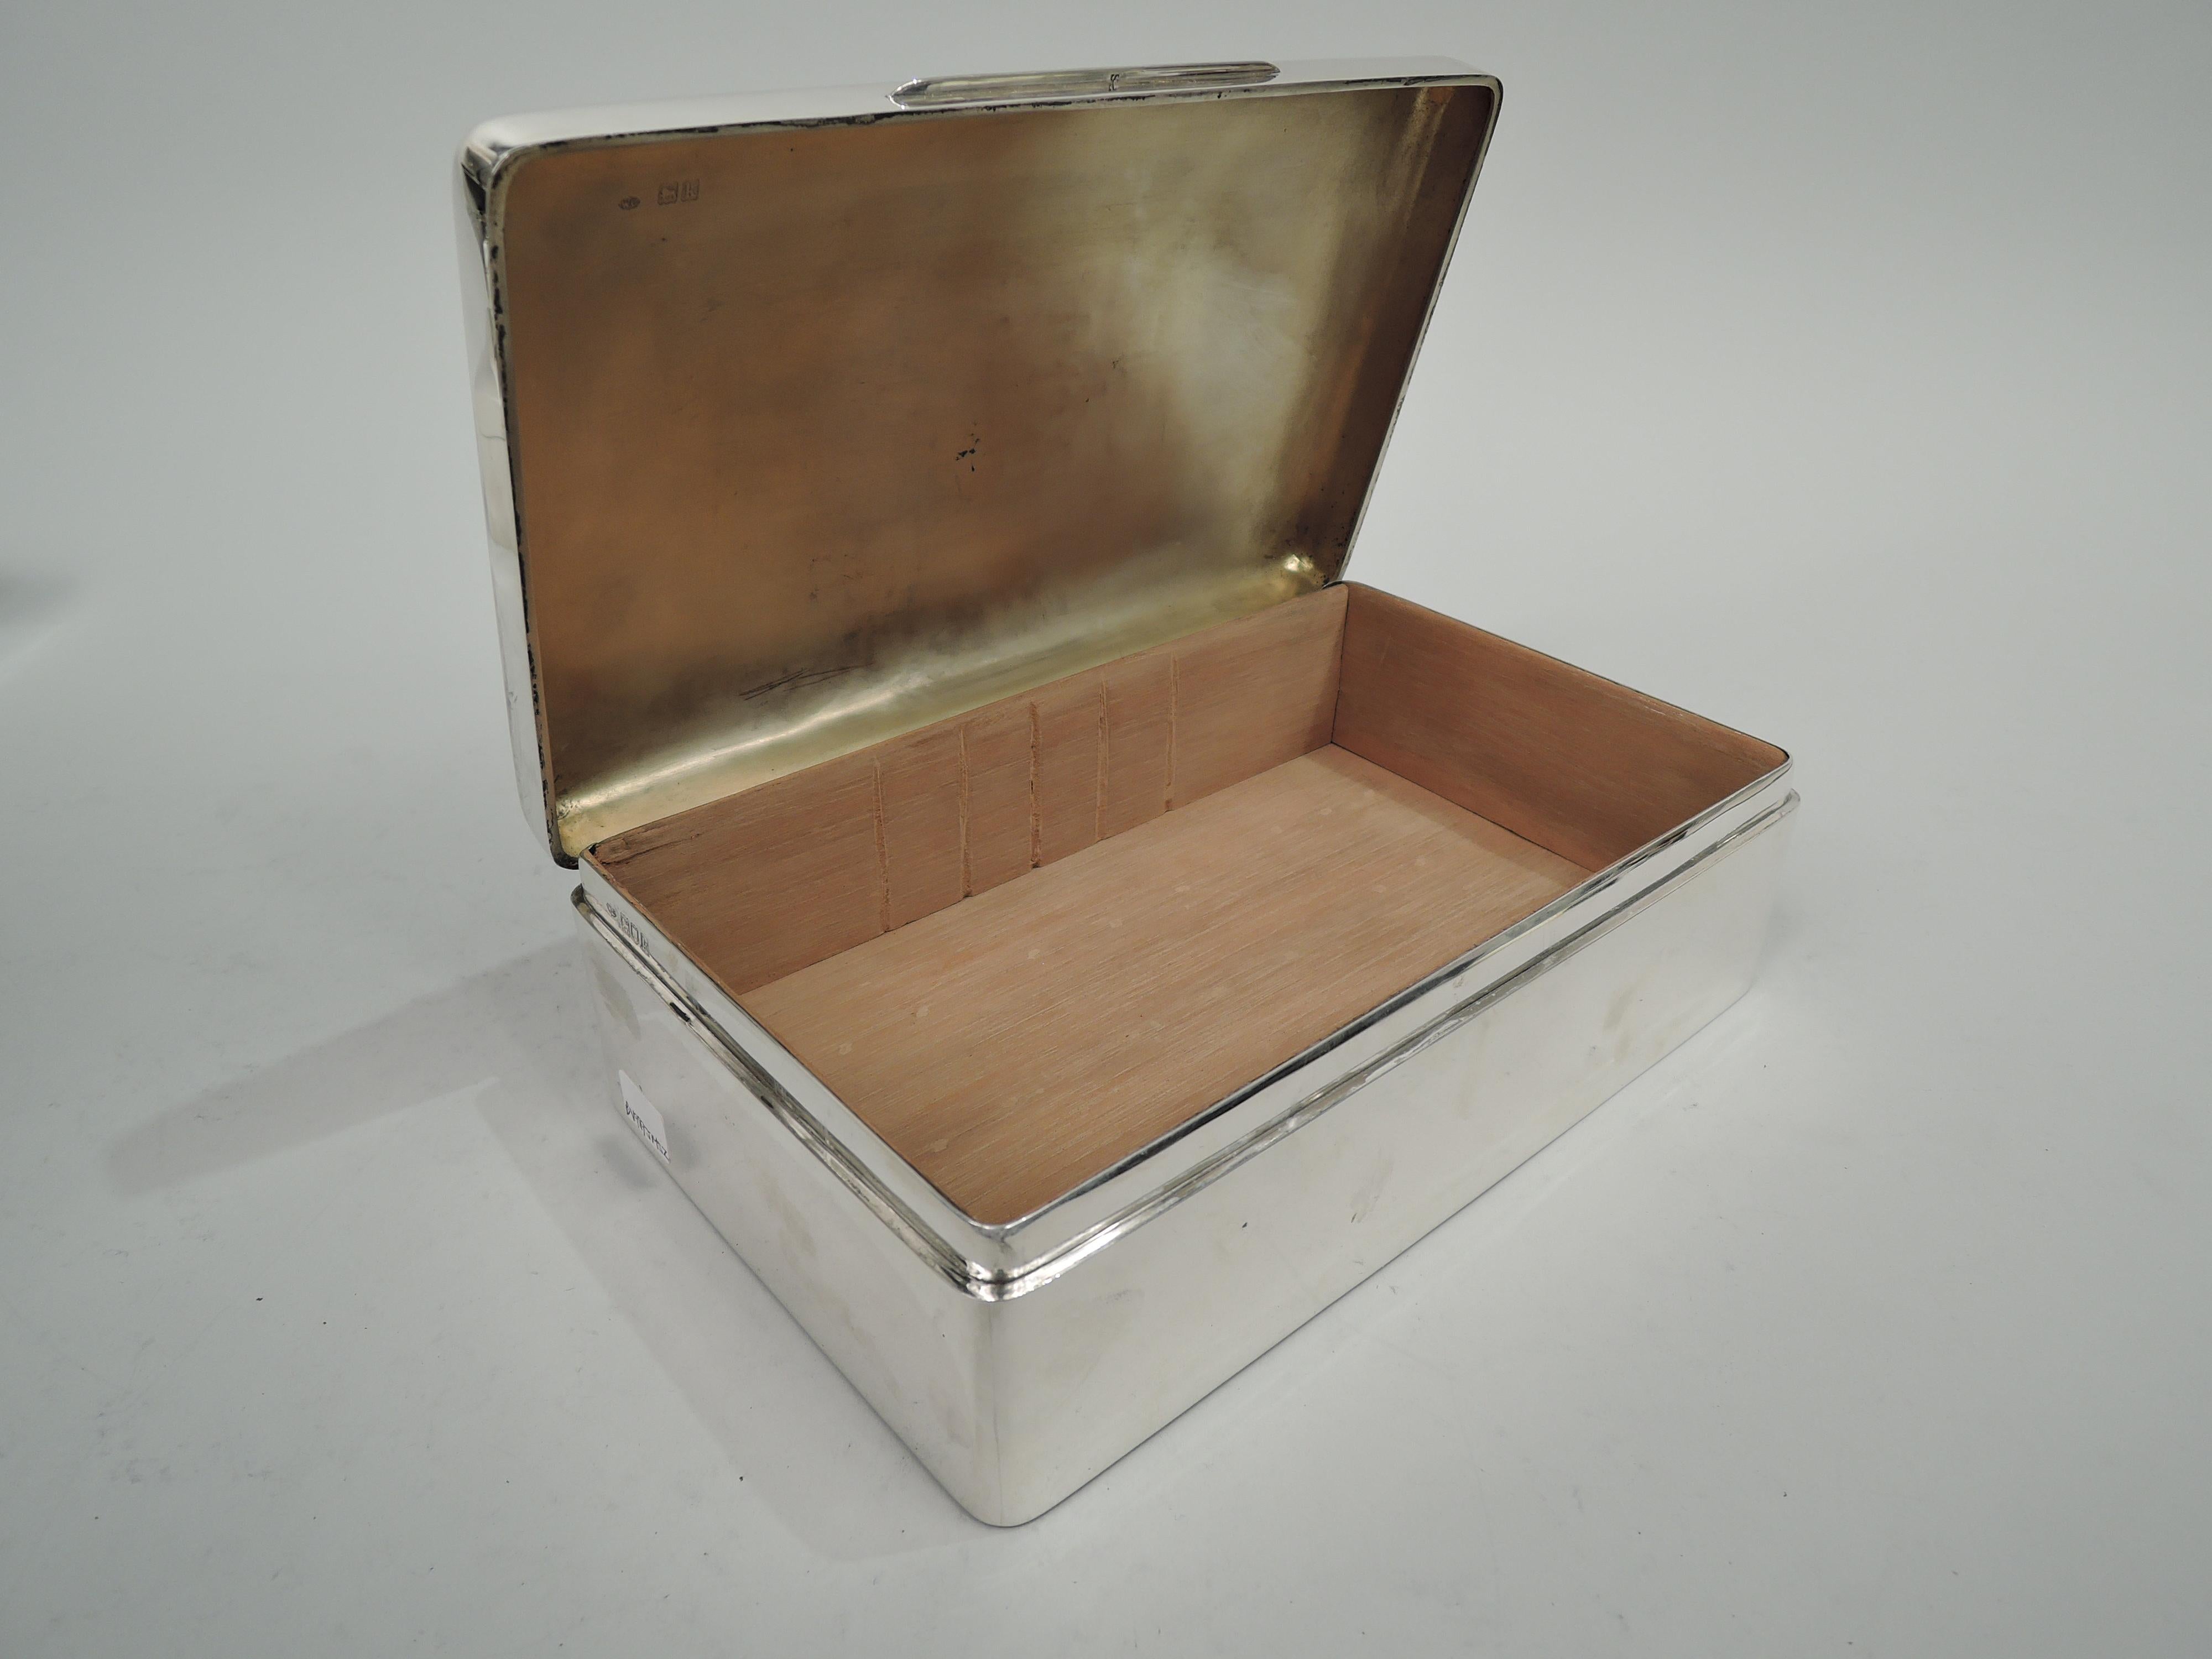 Early 20th Century English Edwardian Modern Sterling Silver Box by Comyns